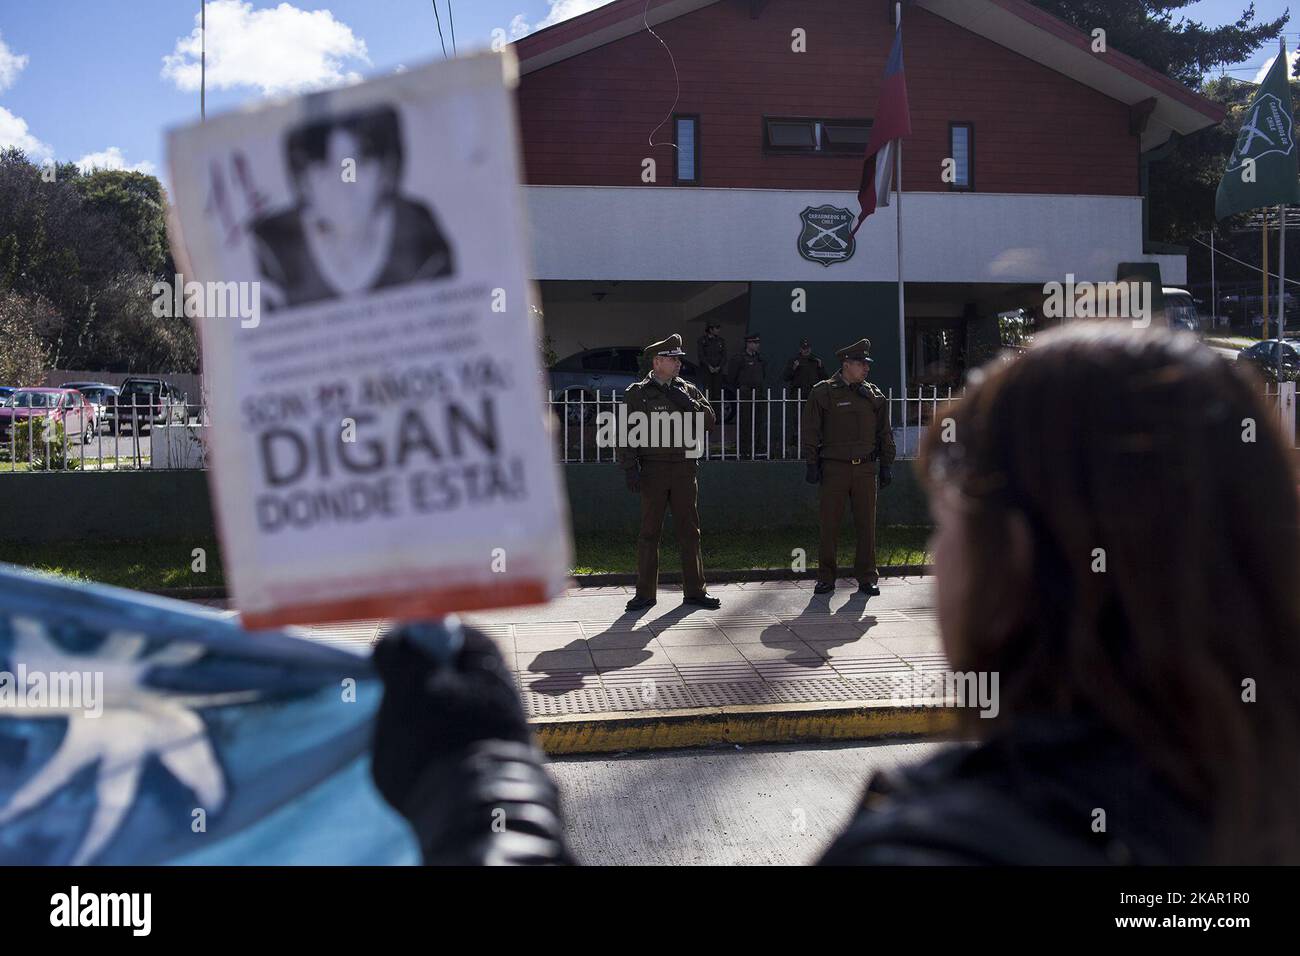 Protestor in front of the police station during a protest to commemorate to commemorate the 12 years of the disappearance of the young José Huenante in Puerto Montt, on September 4, 2017. Relatives and friends held a demonstration to commemorate the 12 years of the disappearance of the young José Huenante at the hands of the Chilean policeJosé Gerardo Huenante Huenante, a 16-year-old boy, was arrested and made to disappear by the Chilean police on September 3, 2005 in the city of Puerto Montt in southern Chile. José disappears during the government of the Concertación chaired by Ricardo Lagos. Stock Photo